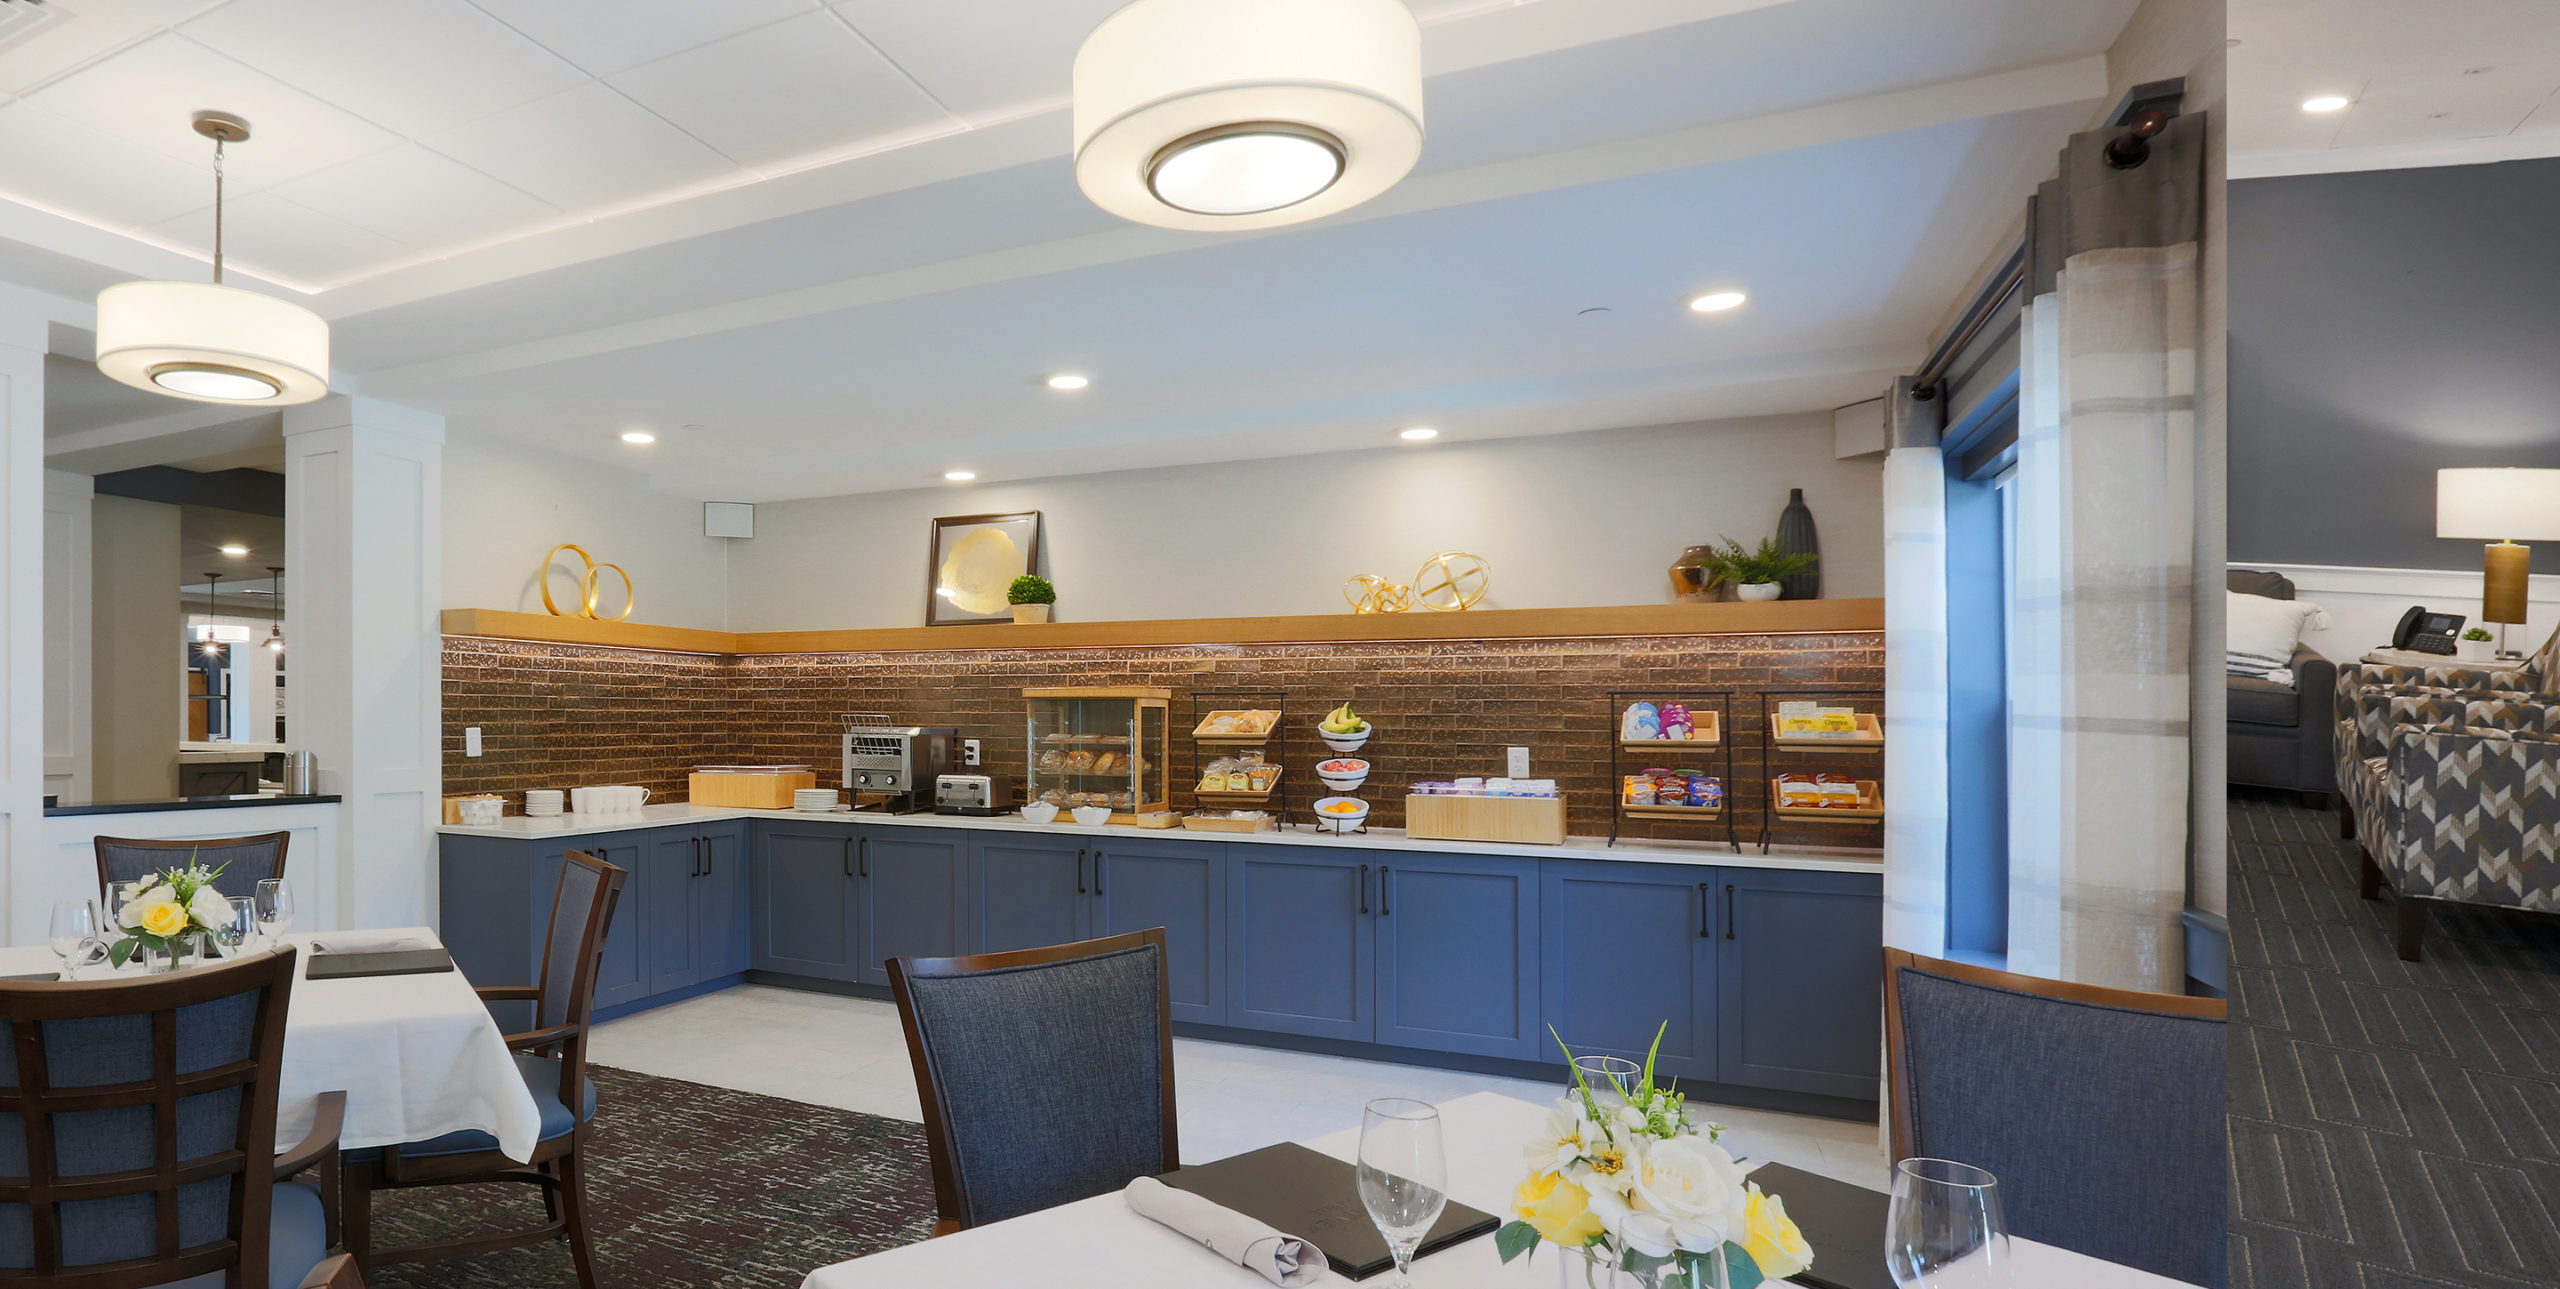 Dining room area with pastries and condiments lined on the counter at Brightview Senior Living in Sayville, NY